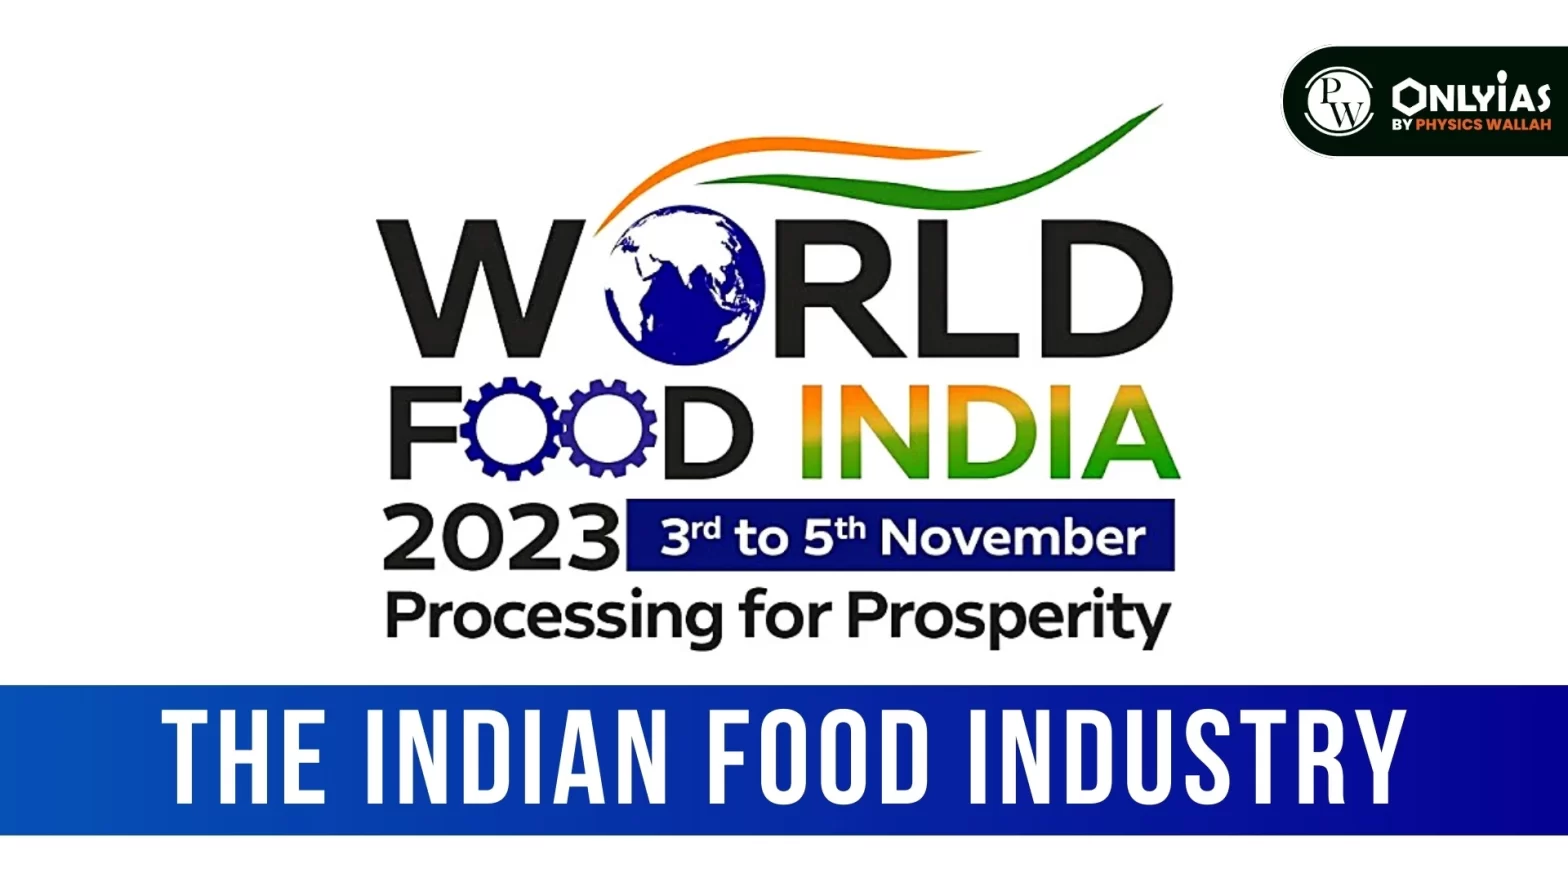 World Food India 2023 and the Indian Food Industry